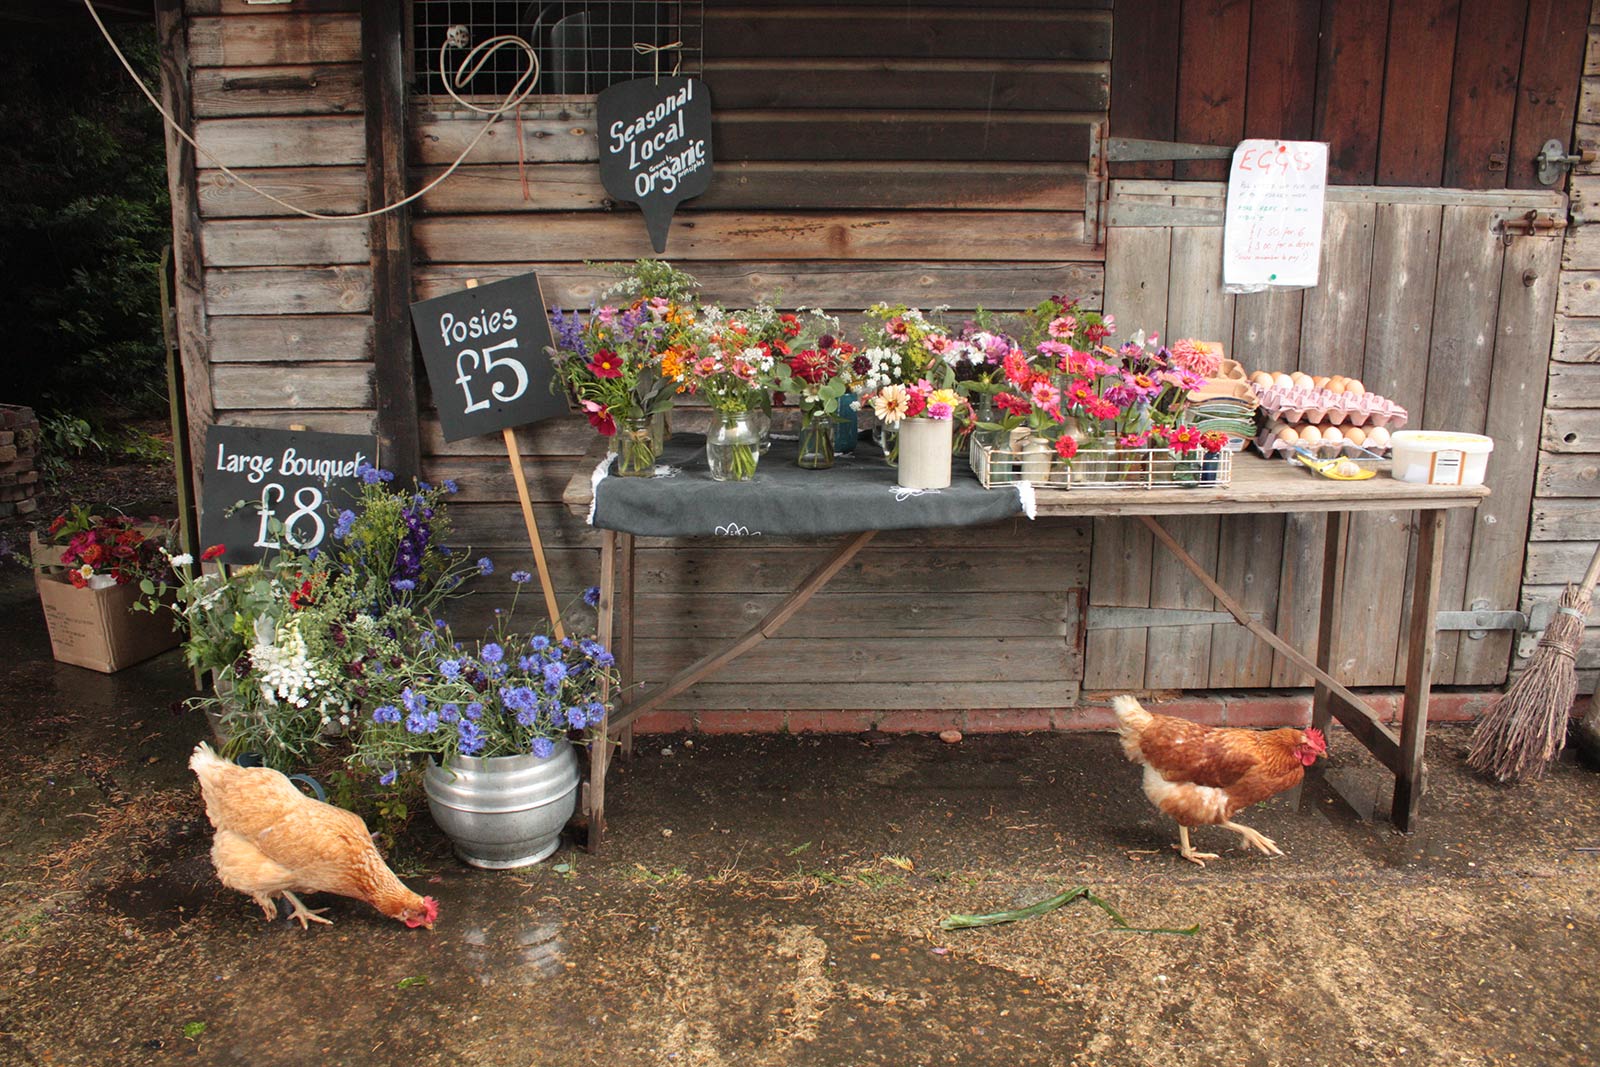 Our first flower Stall "The Chicken Shed", at Cupsmiths, in association with Farnham Community Farm.